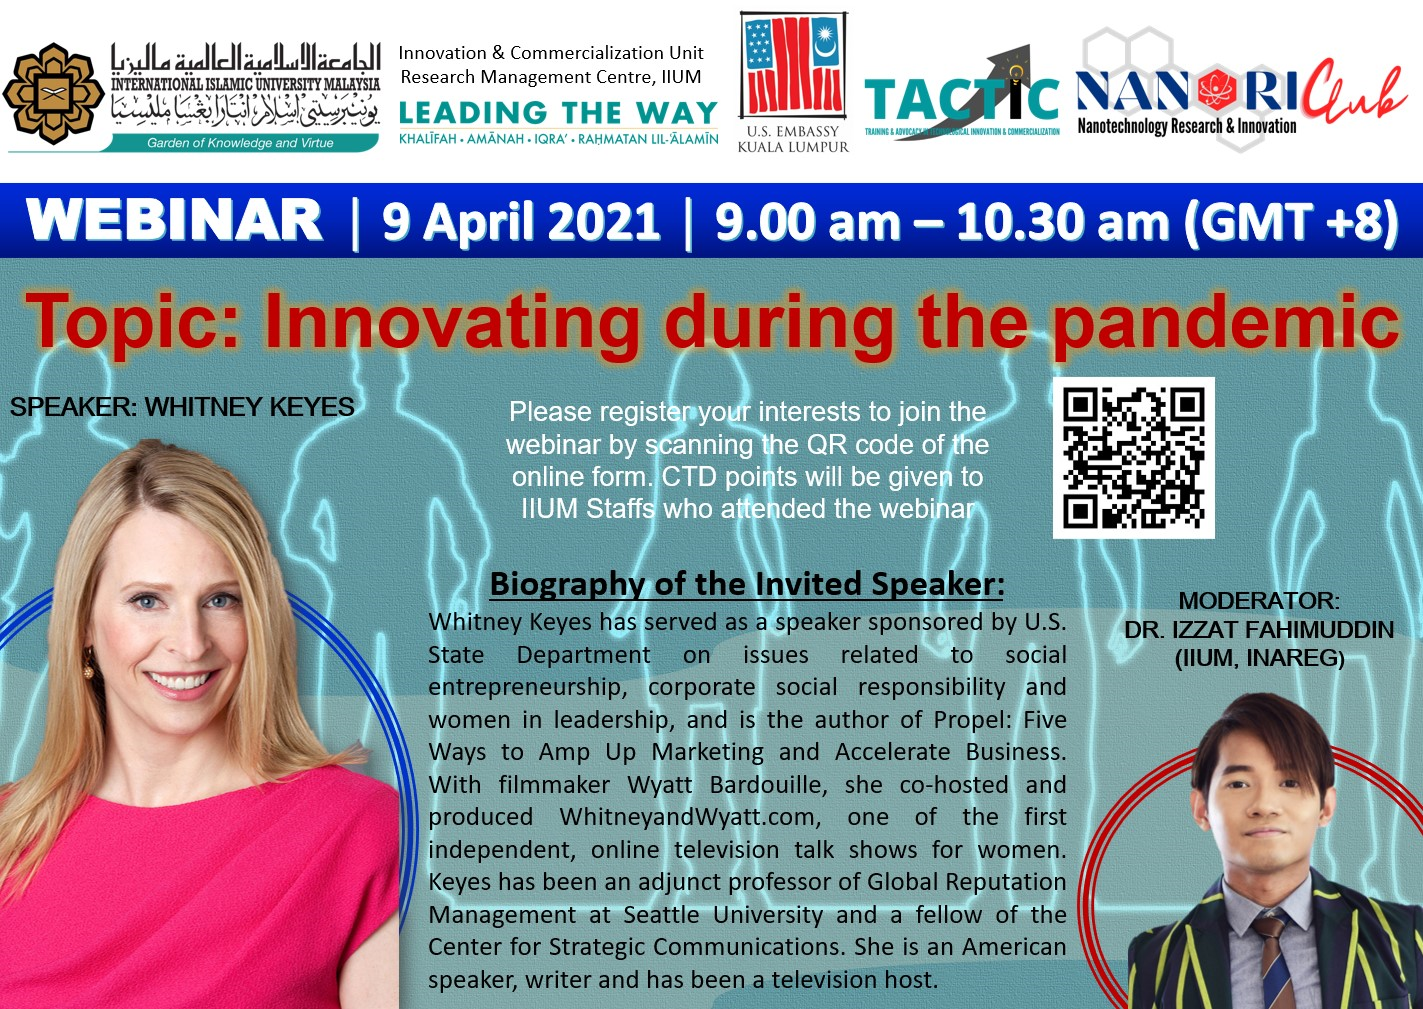 INVITATION TO ATTEND A WEBINAR: INNOVATING DURING THE PANDEMIC